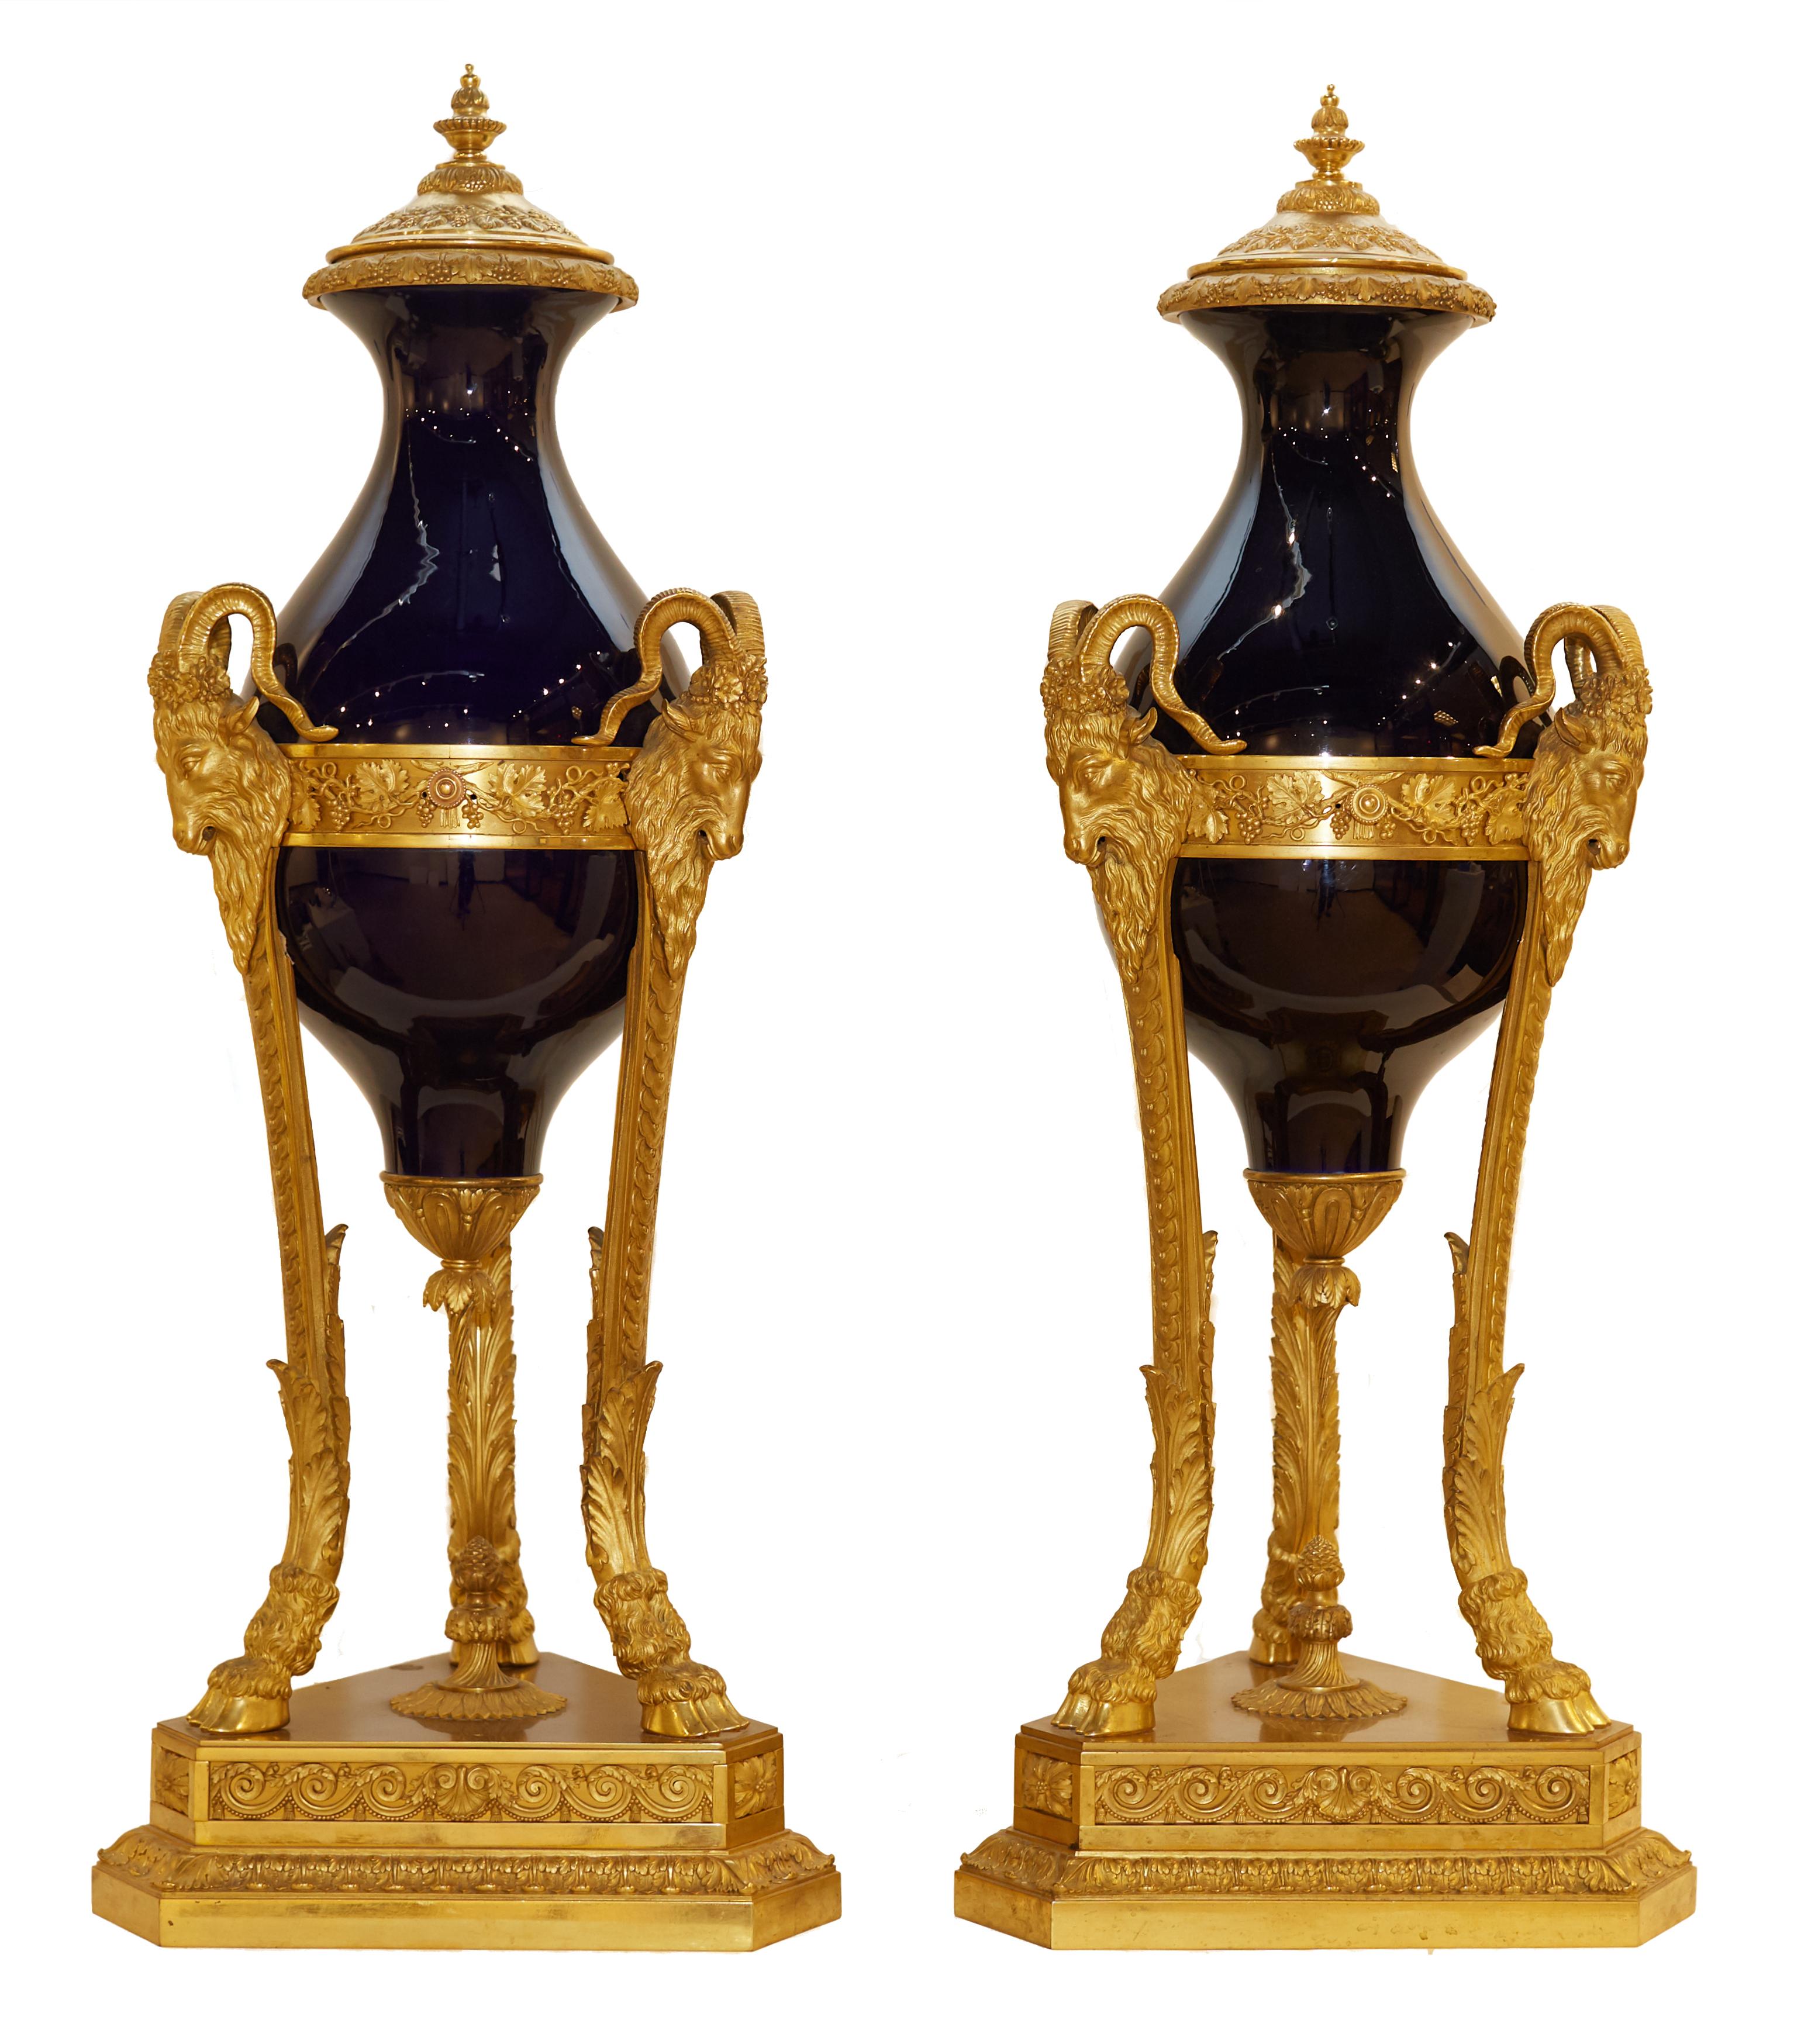 Pair of finest quality and palatial cobalt blue Sevres porcelain bronze mounted urns with ram's head motifs.
 